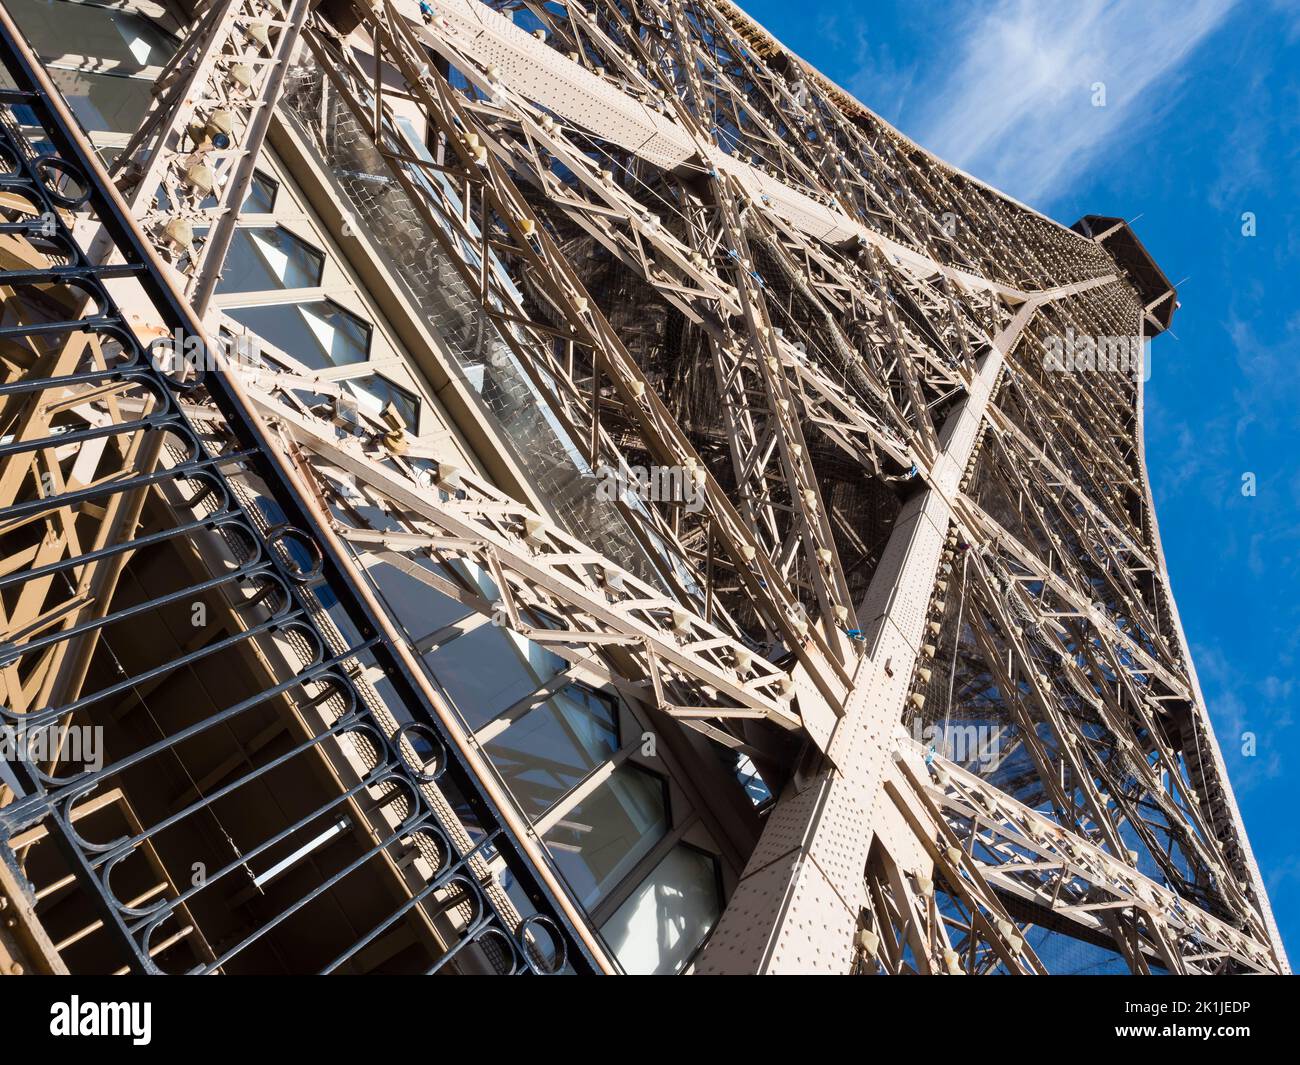 Looking up Eiffel tower. Stock Photo